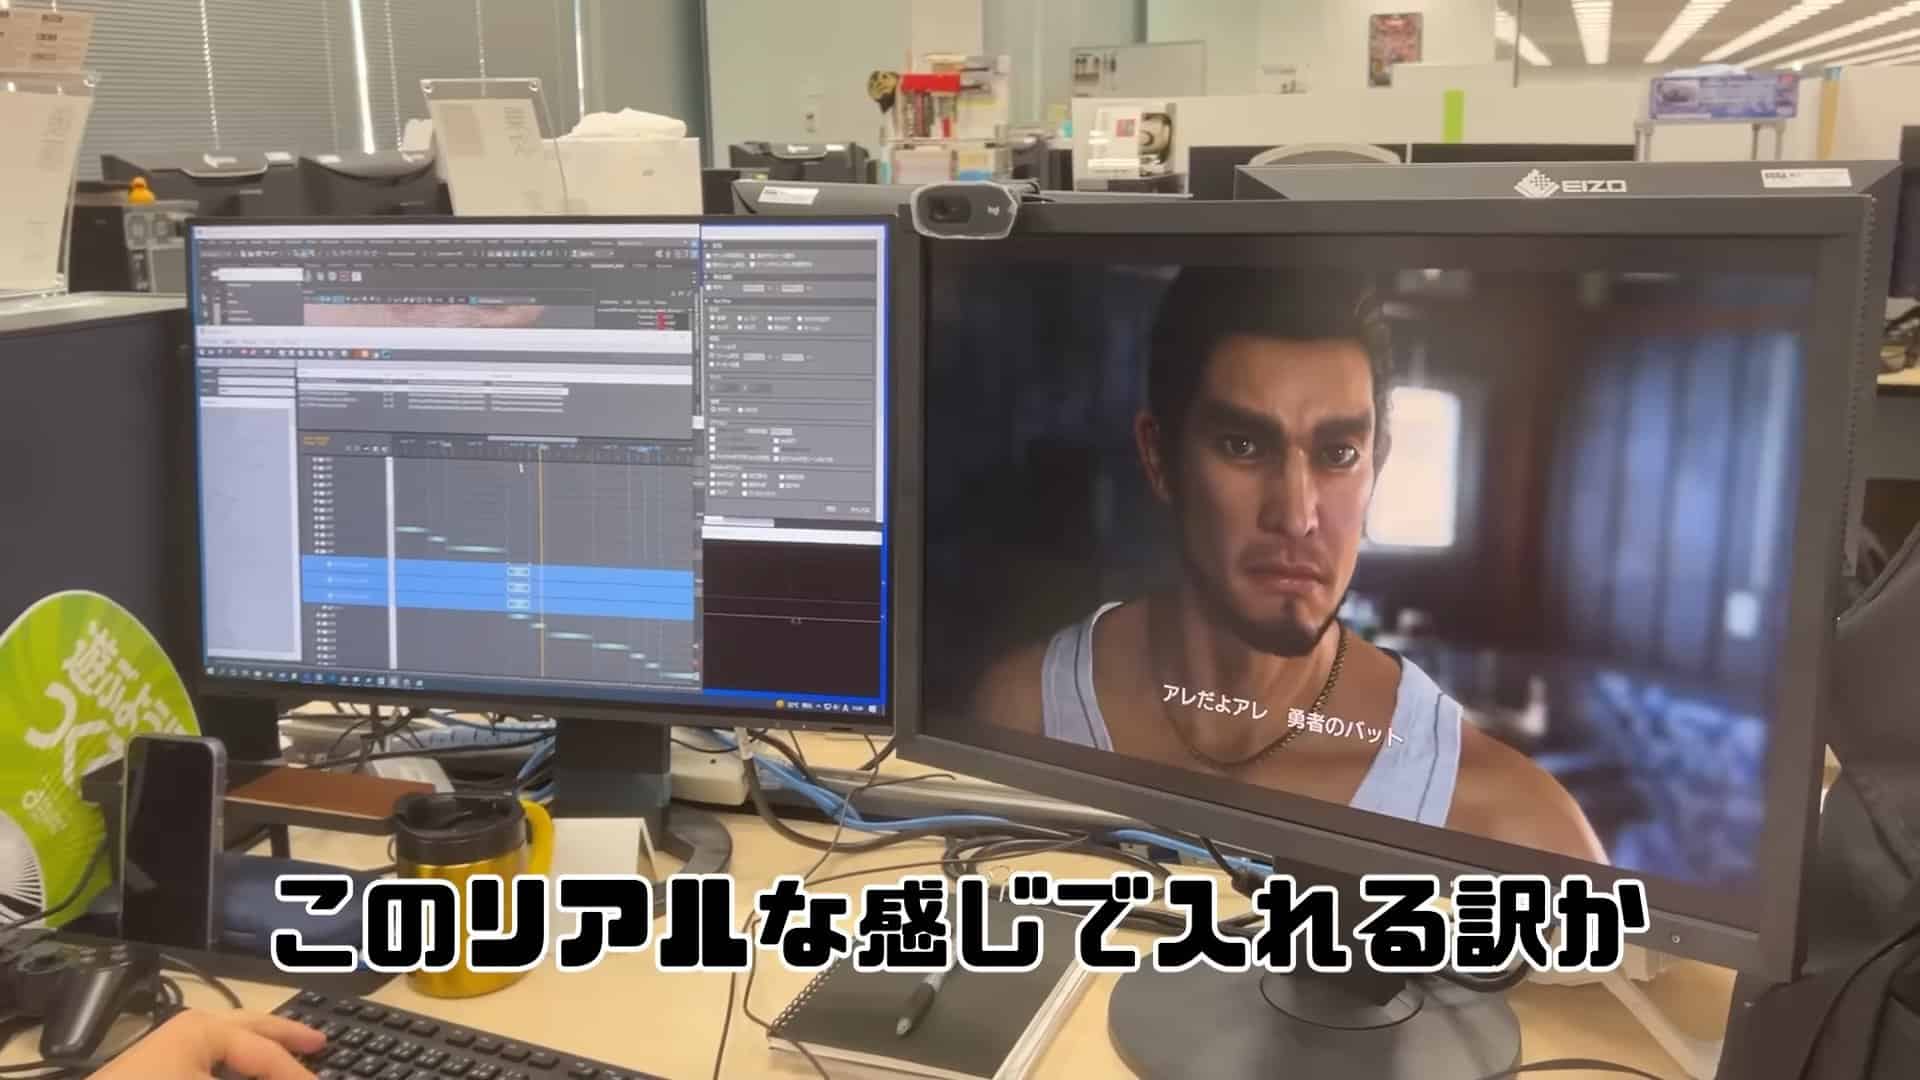 First WIP shots of Yakuza 8 appear online